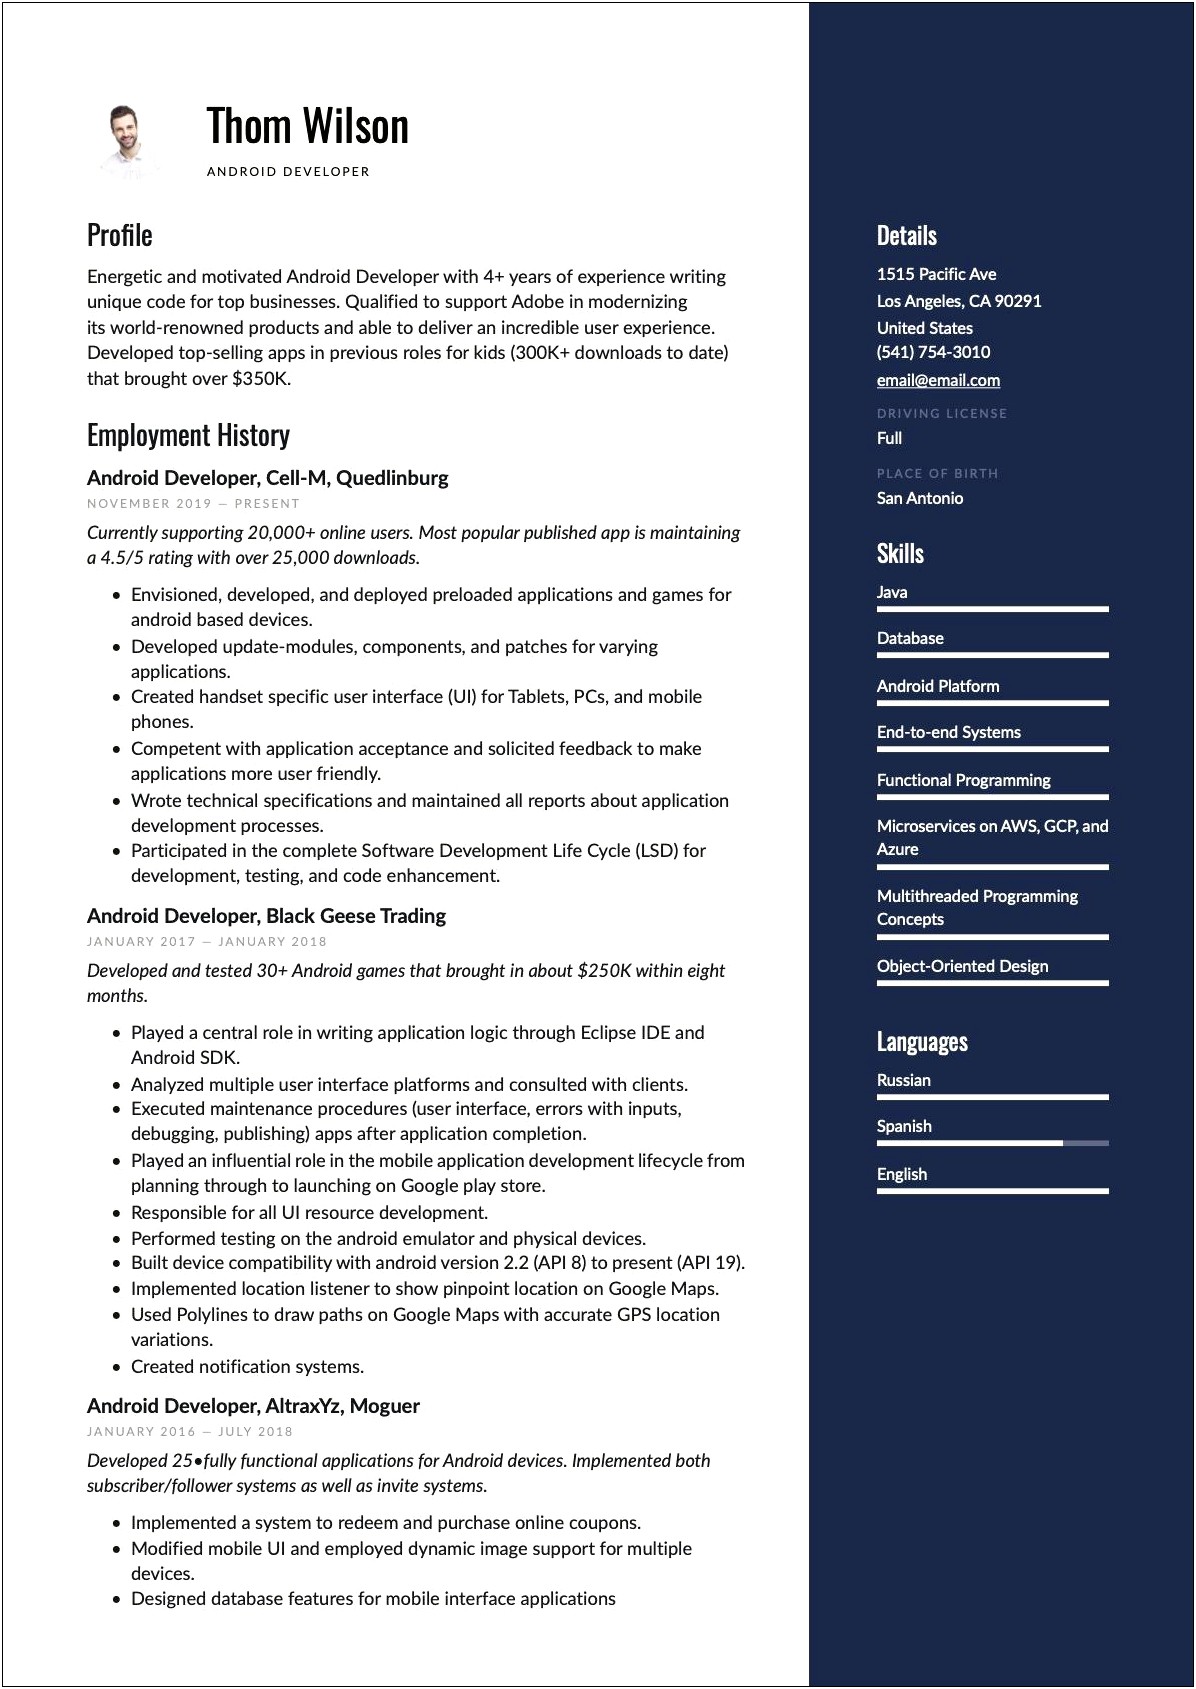 Android Developer Resume Template Free Download